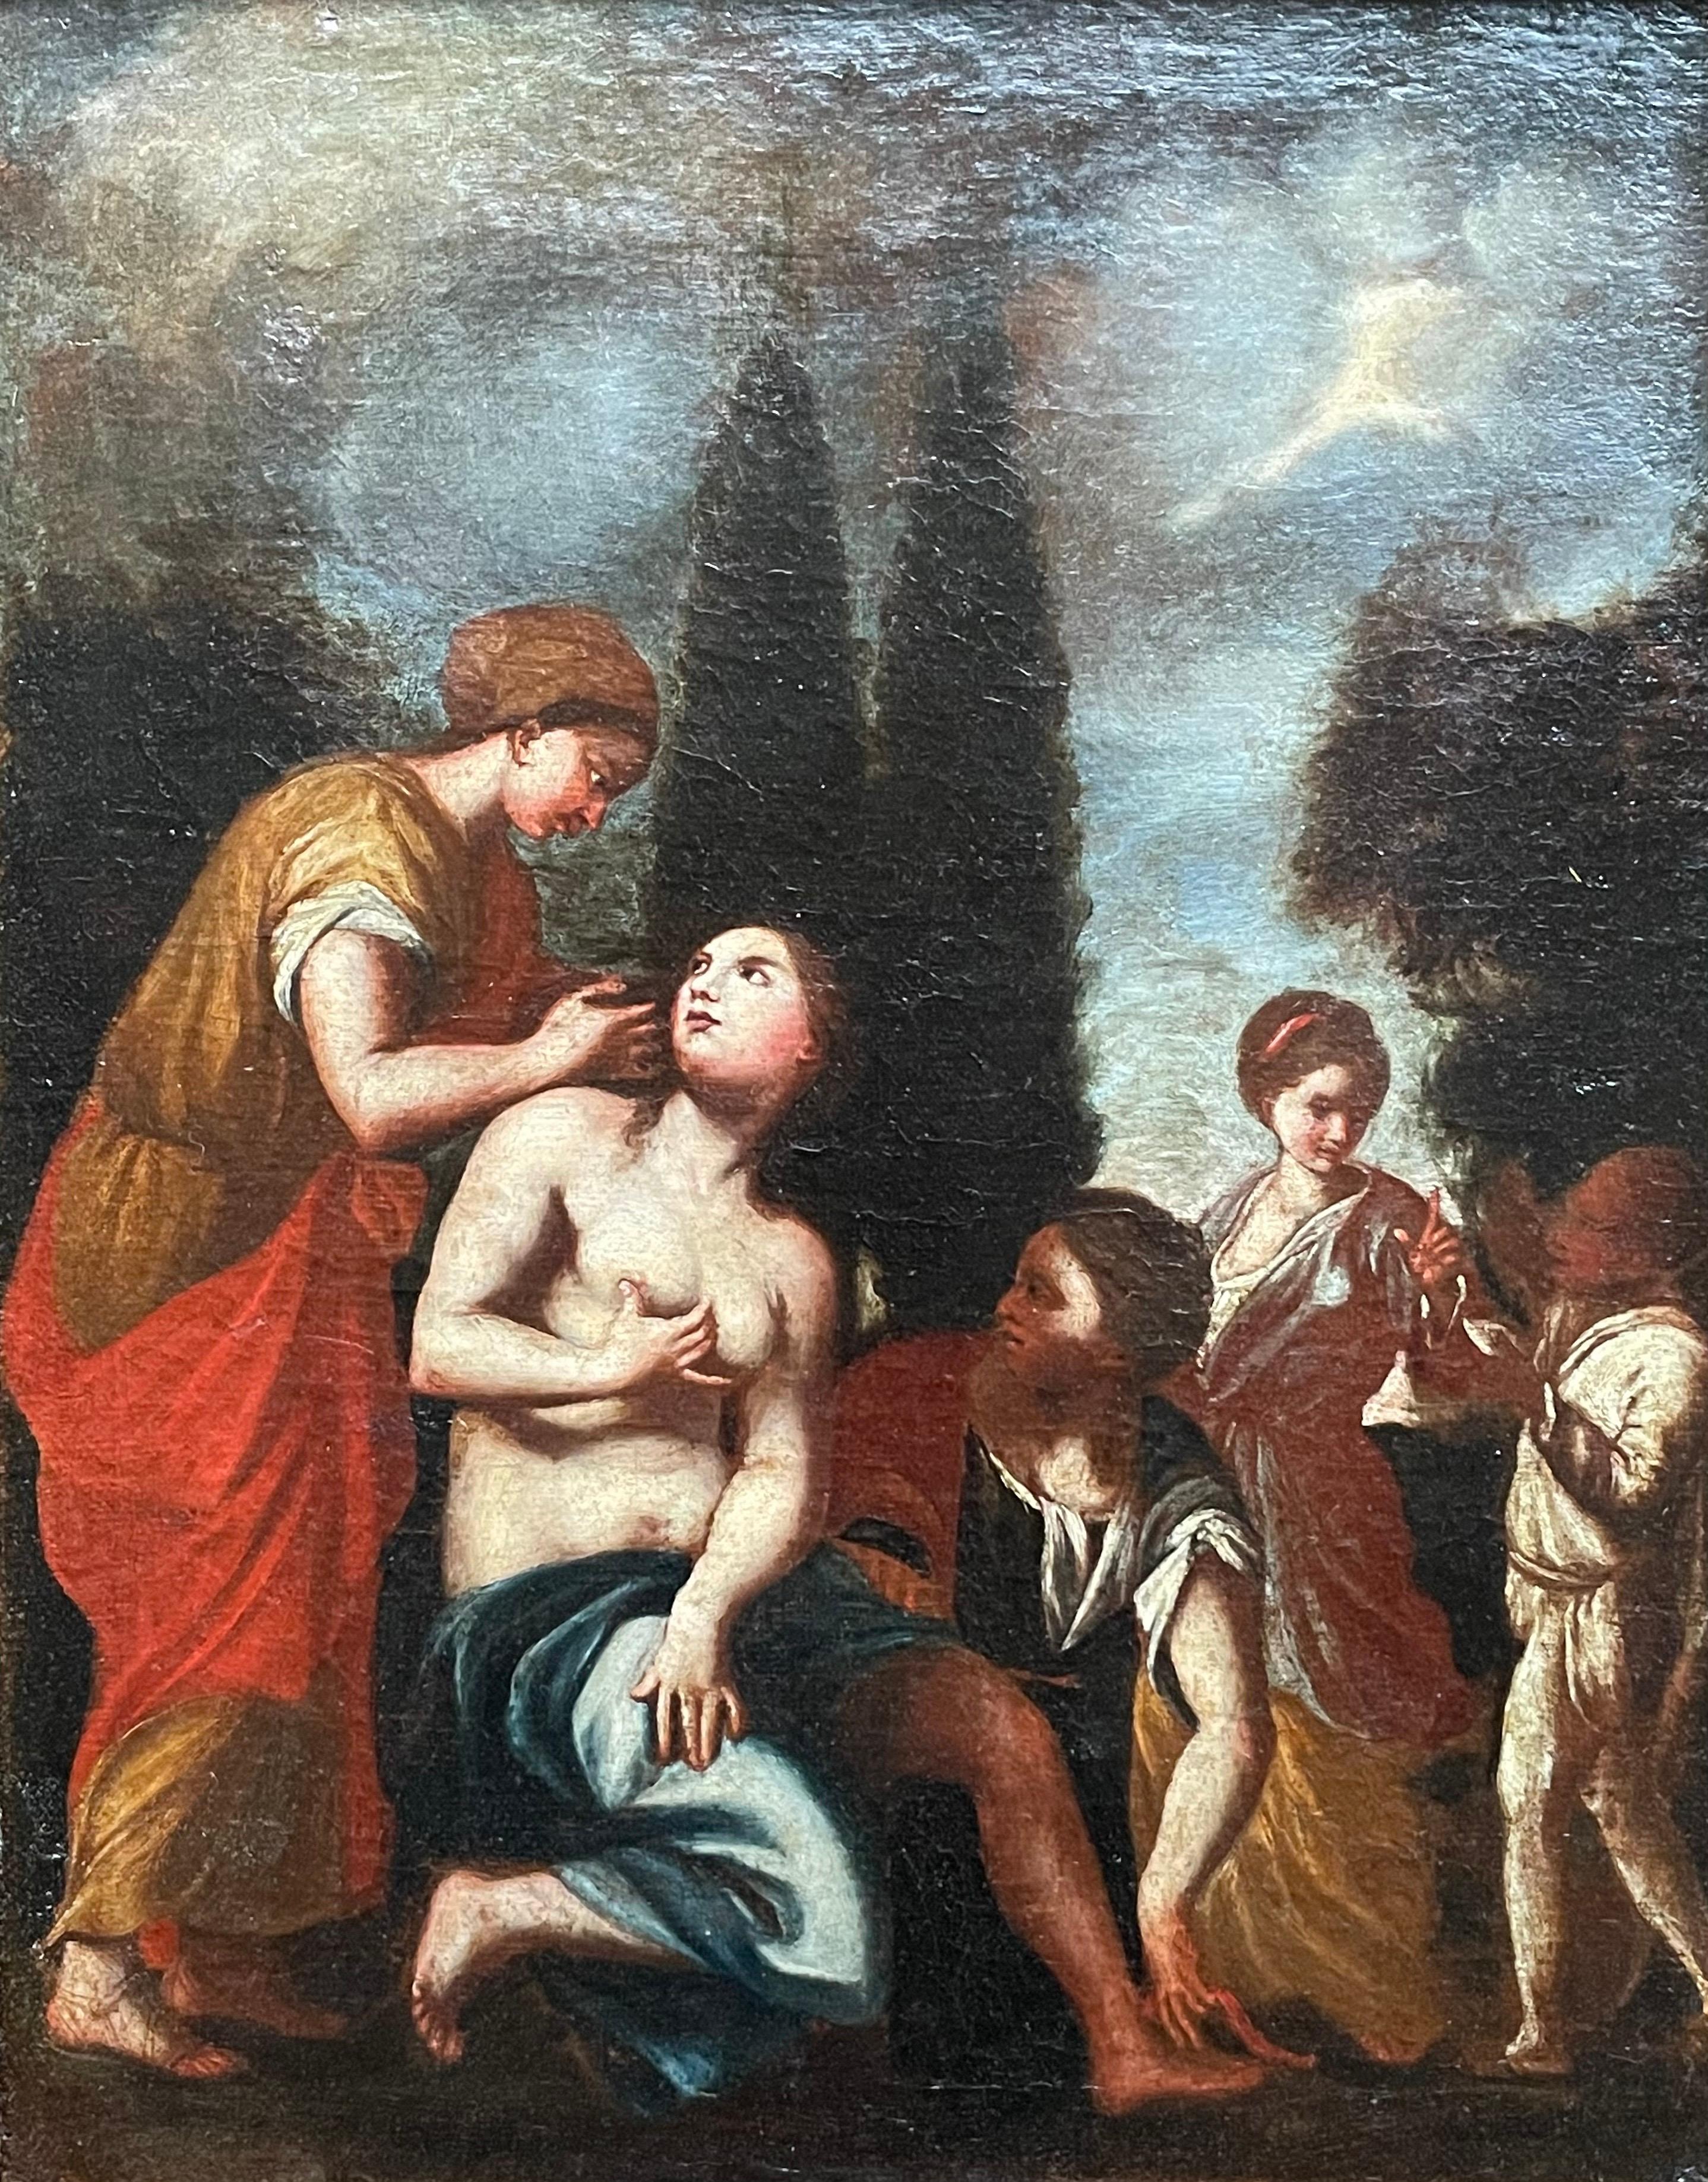 Unknown Figurative Painting - FINE 17TH CENTURY ITALIAN OLD MASTER OIL ON CANVAS - THE BATHING OF BATHSHEBA